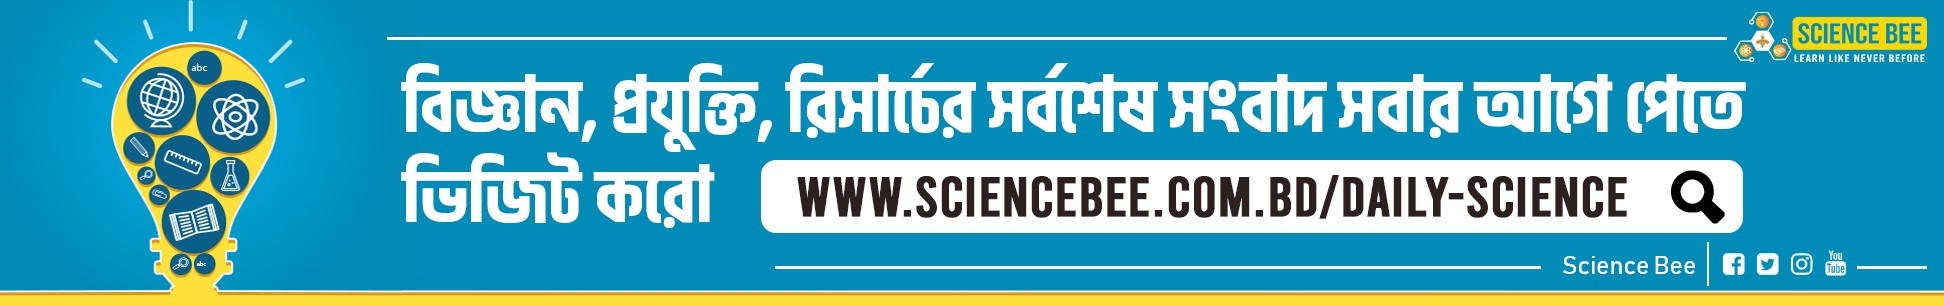 Science Bee Daily Science